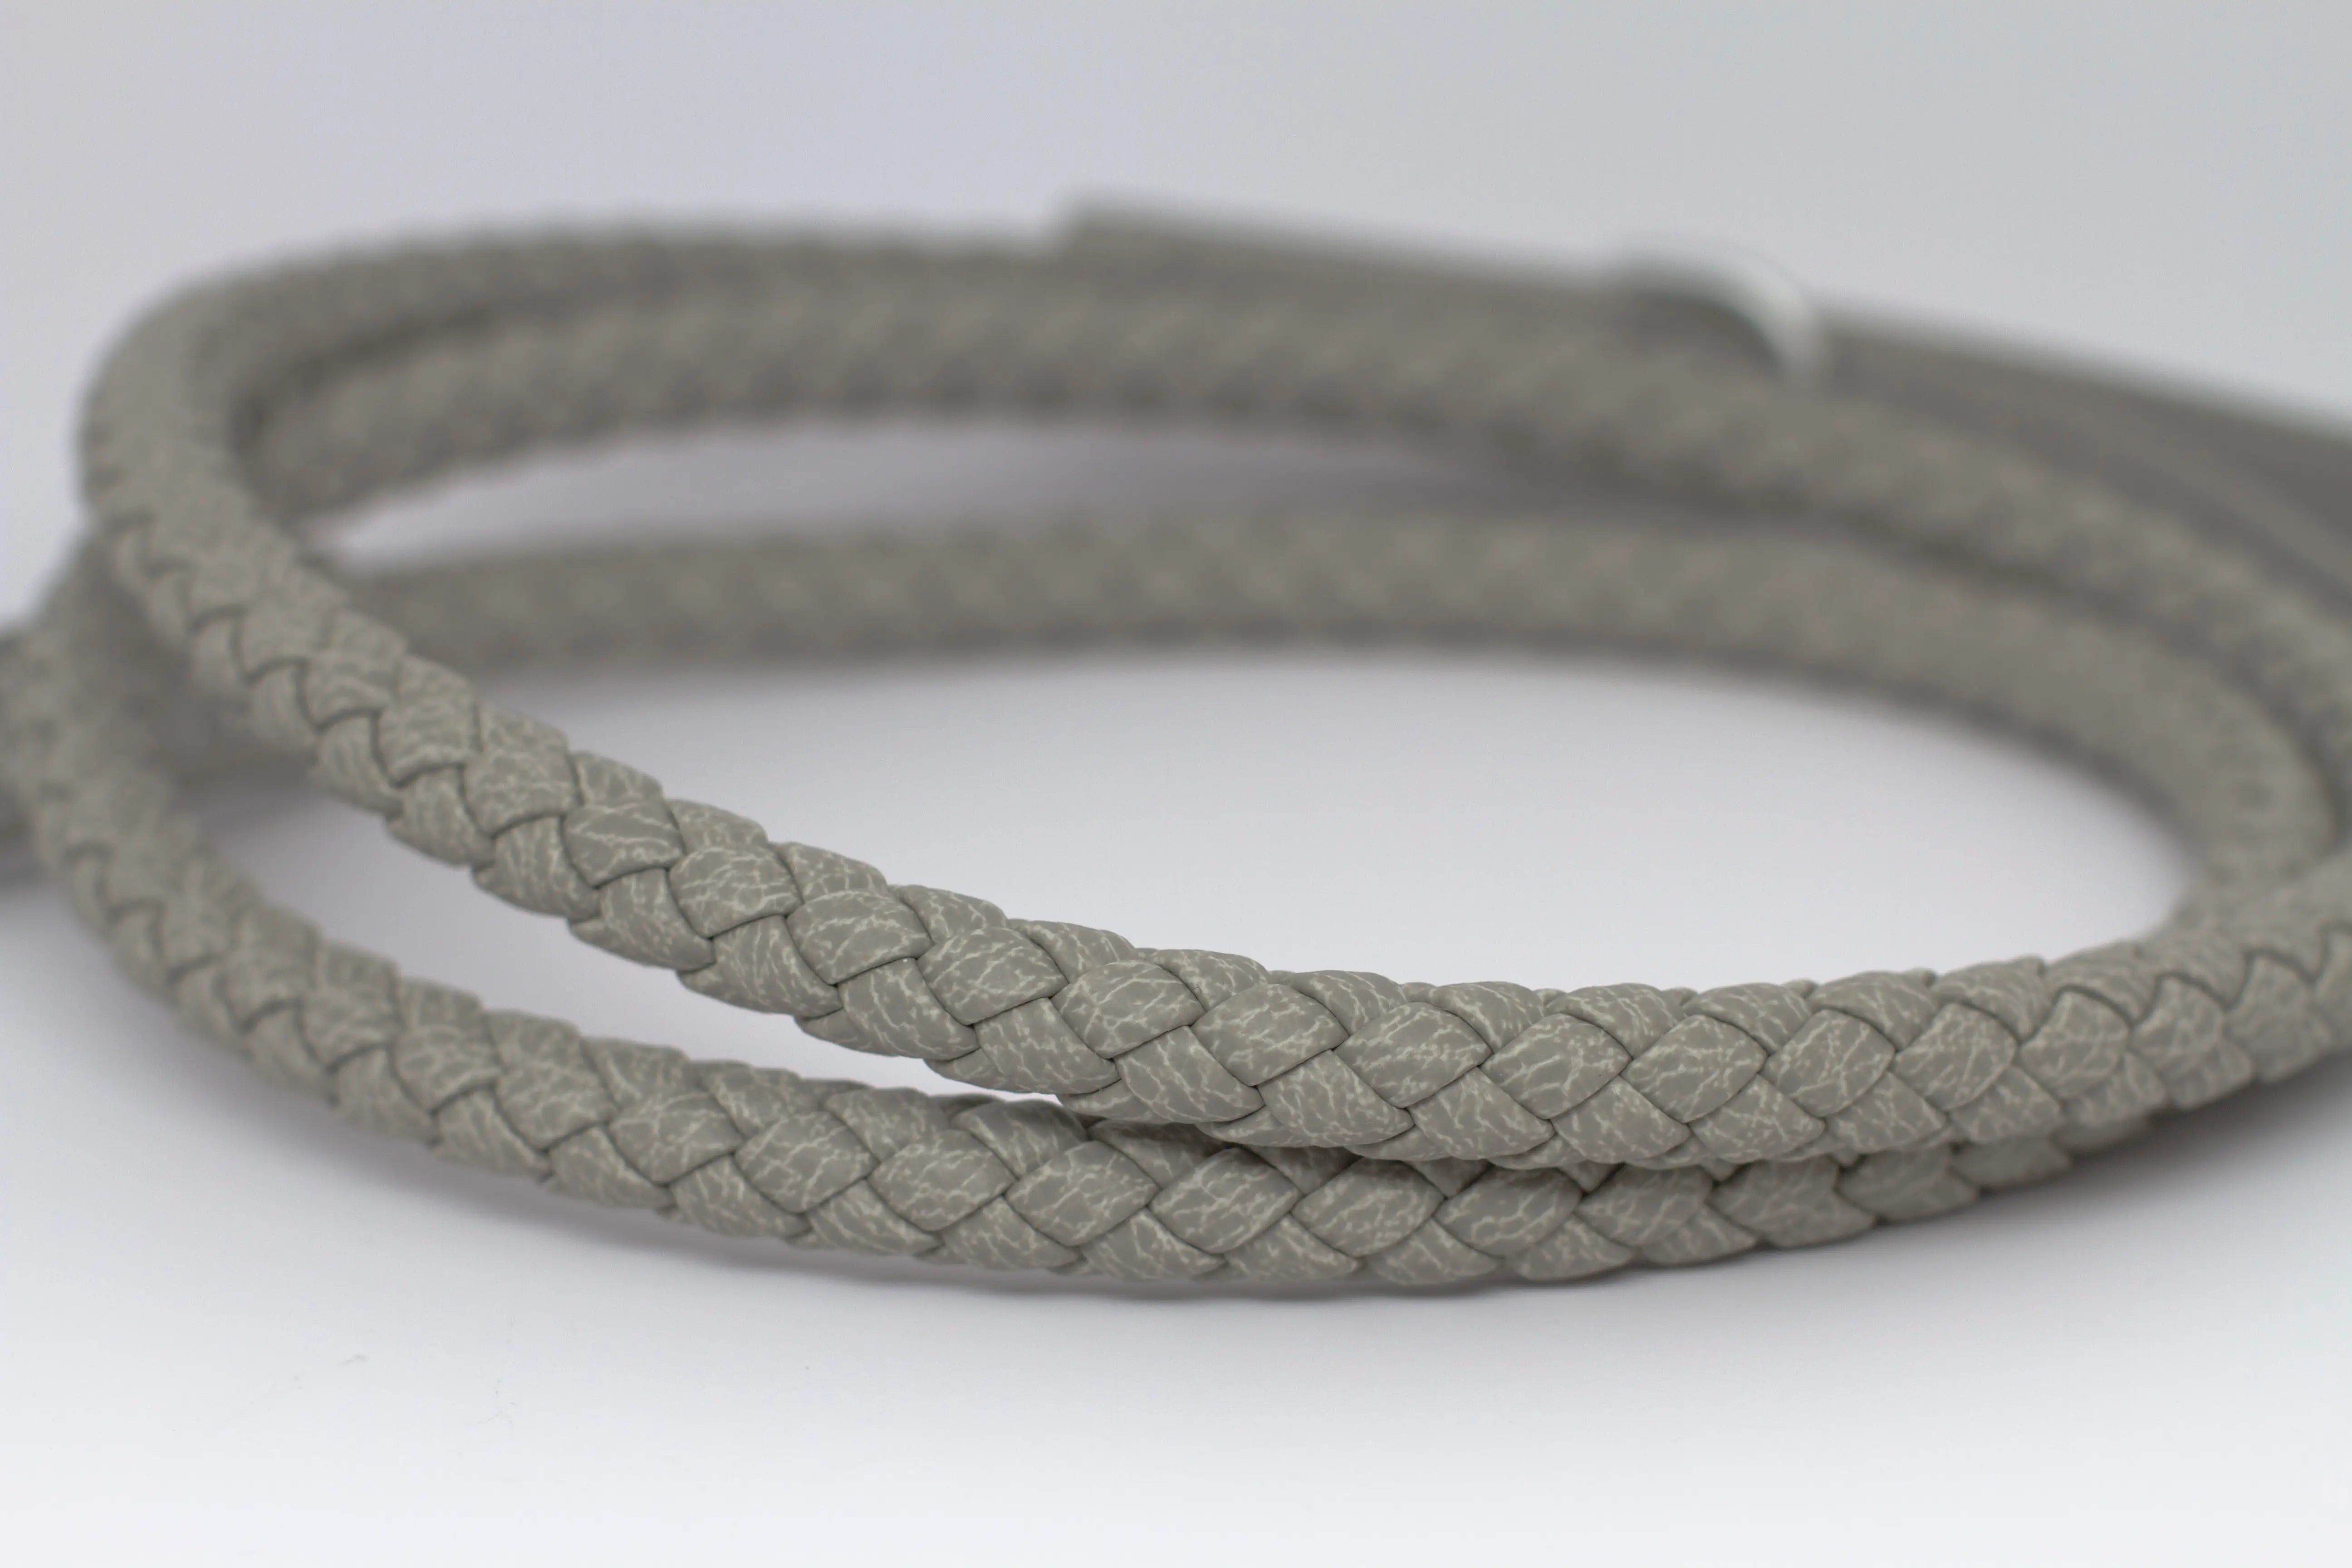 Close up of the braid of waterproof and durable dog leash with marine grade anodized aluminum hardware in the color winter gray.